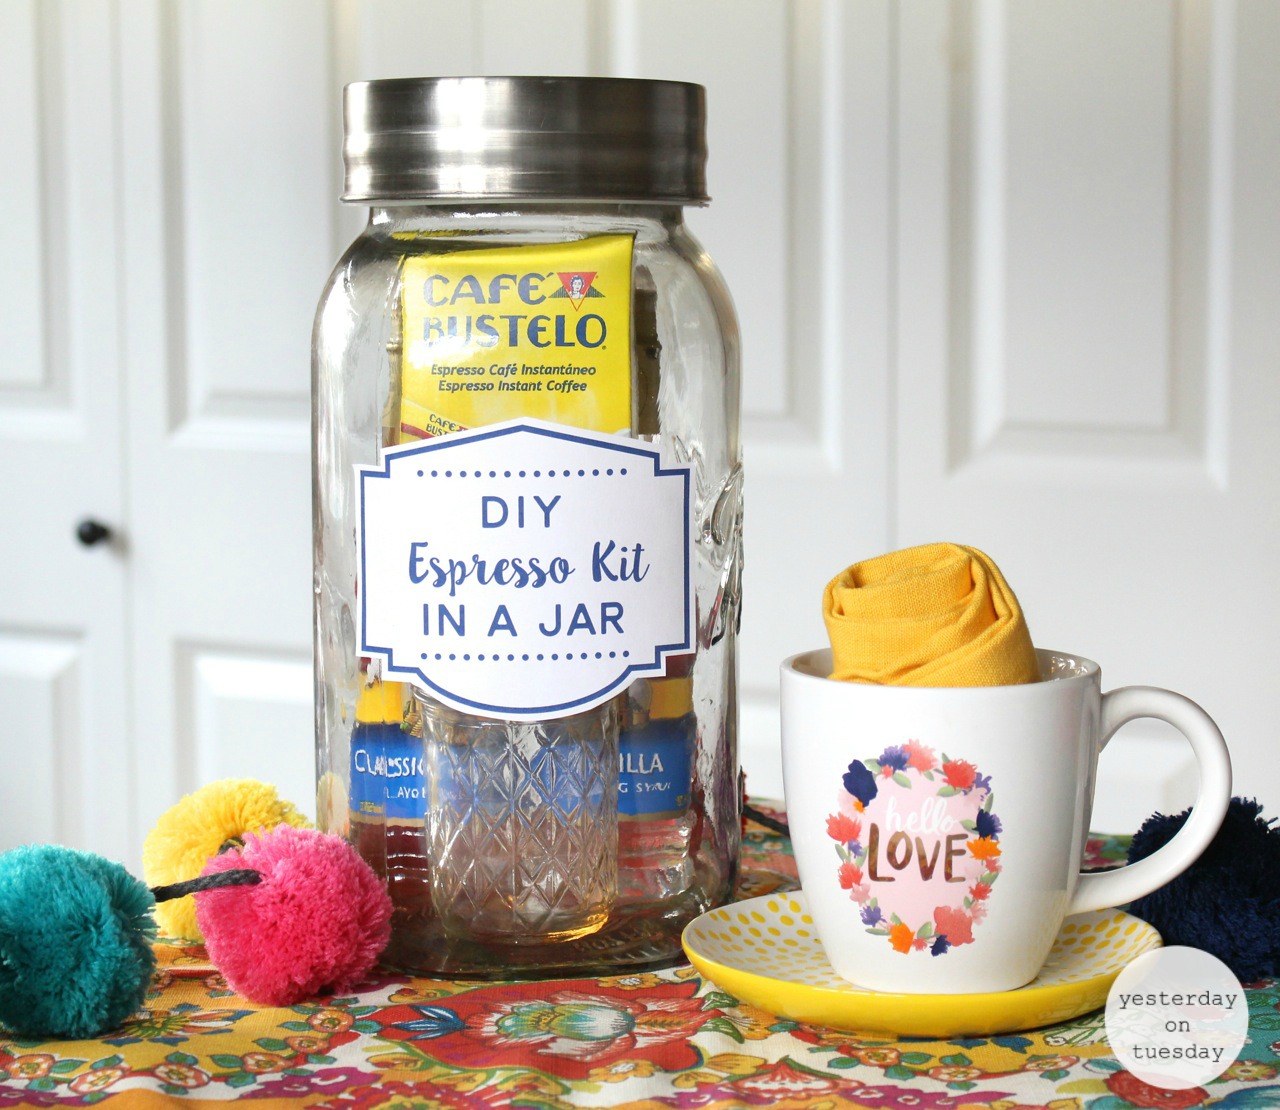 DIY Espresso Kit in Jar: Everything you need to make flavored espresso at home, no espresso machine or needed! Plus how to froth milk in a mason jar.